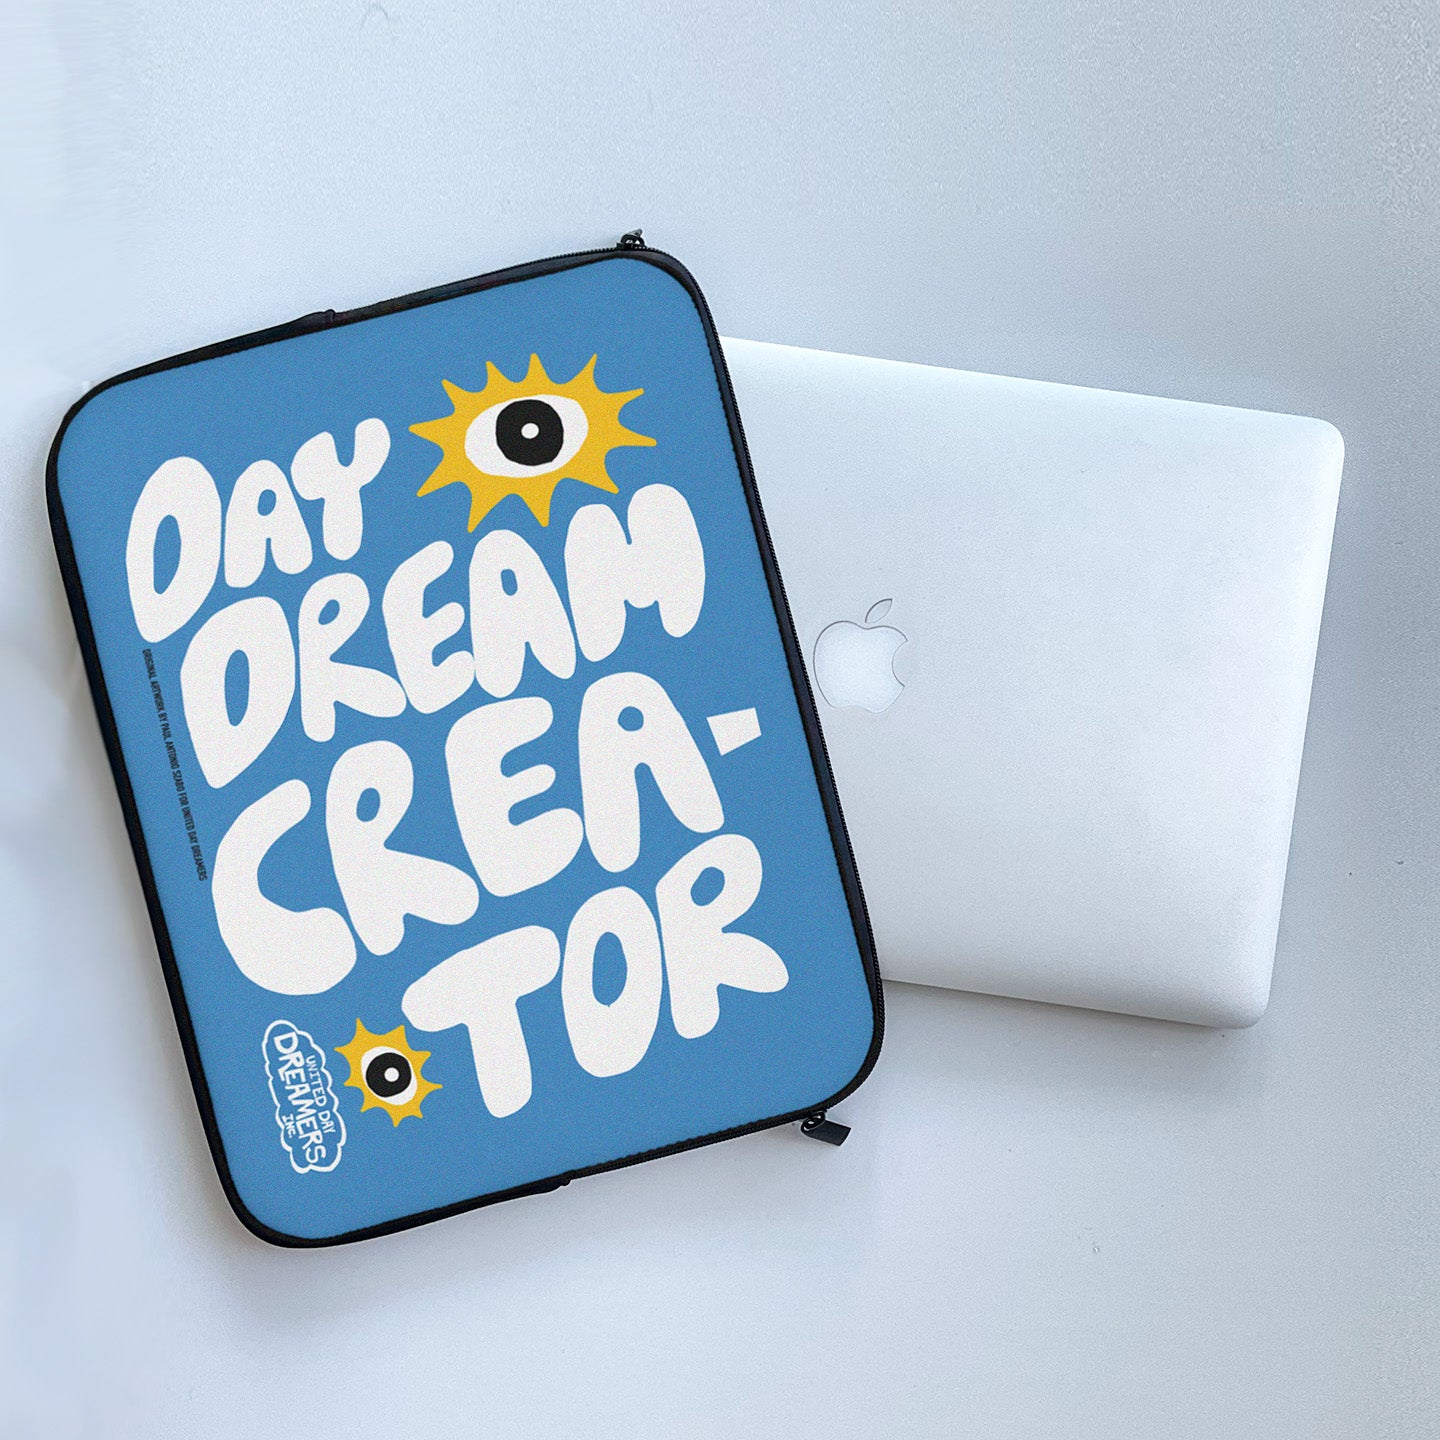 Day Dream Creator MacBook Pro And 10 to 17 Inch Laptop Computer Sleeve